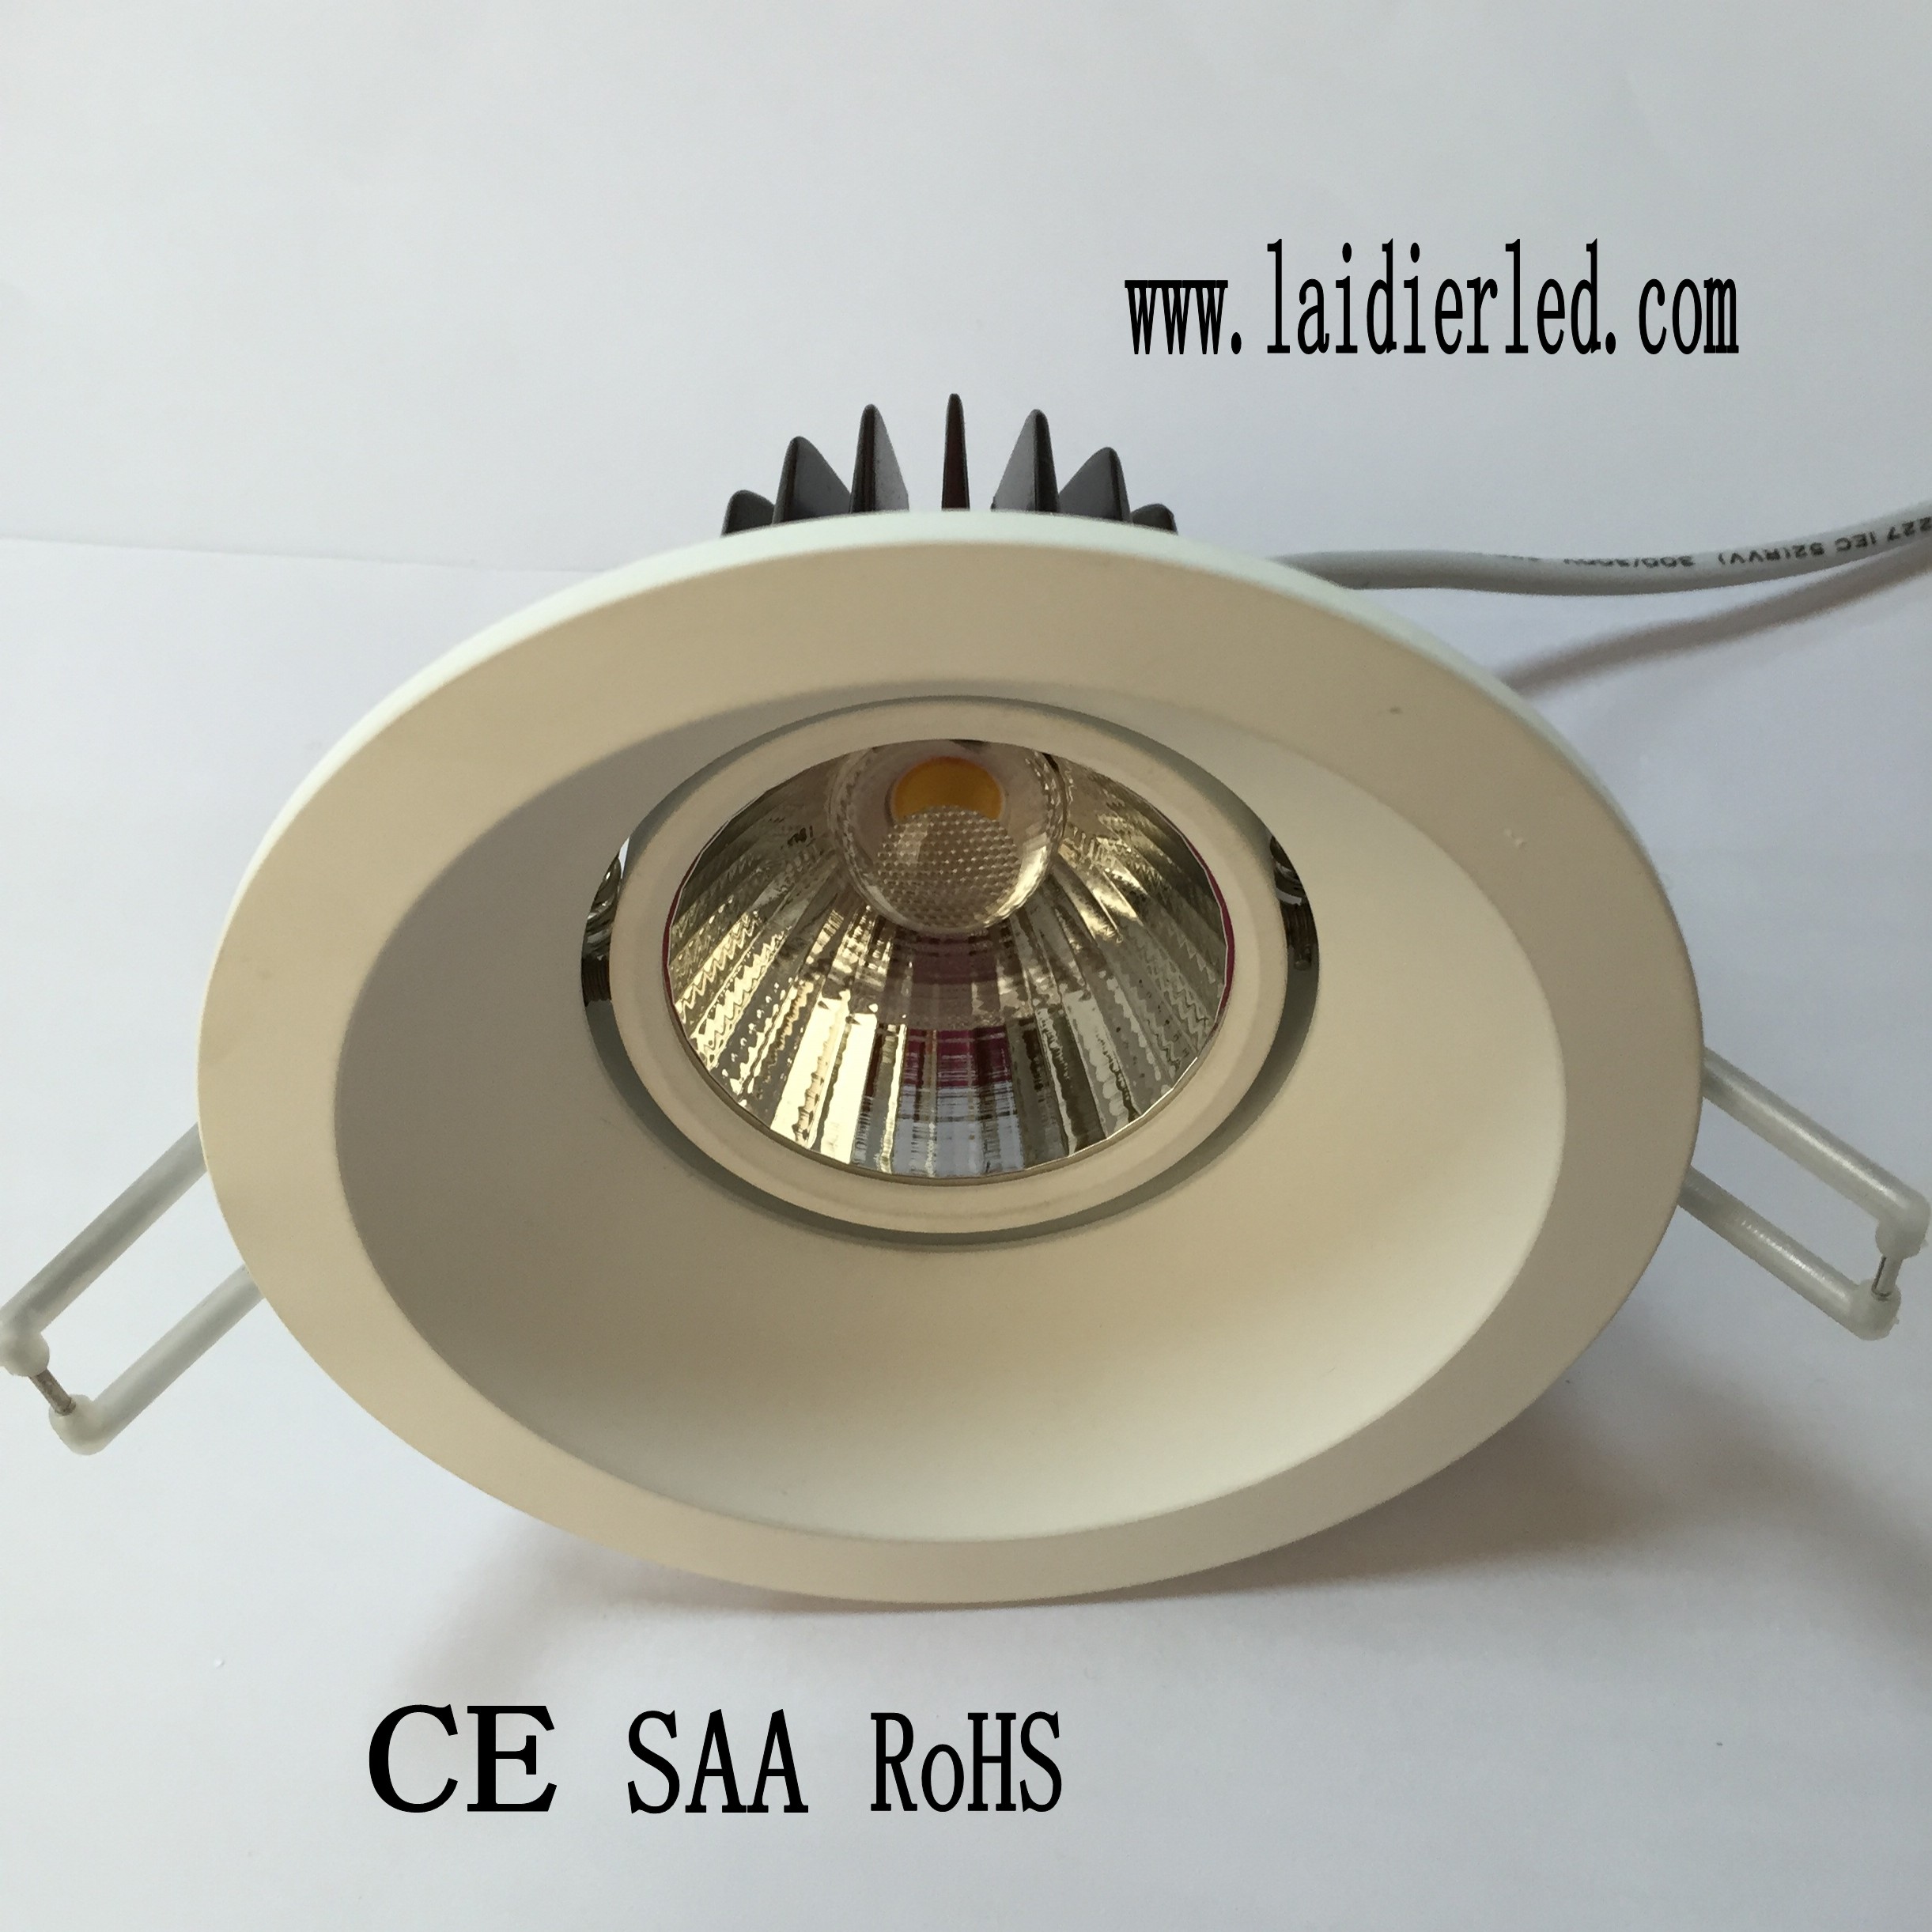 China supplier, high performance LED Down Light 10W with CE SAA